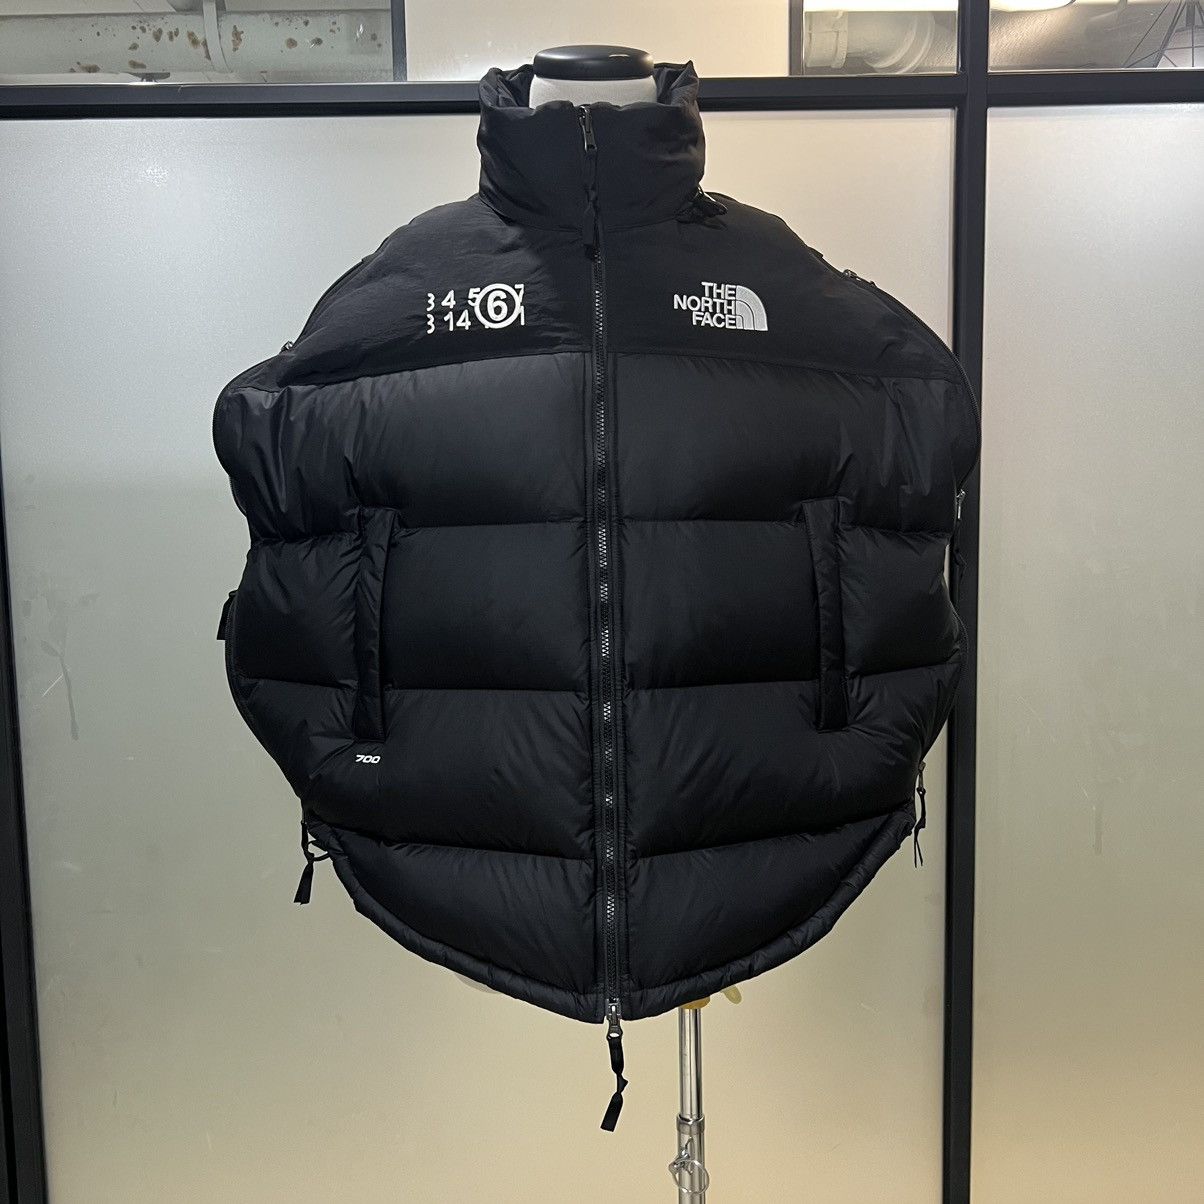 Mm 6 North Face | Grailed